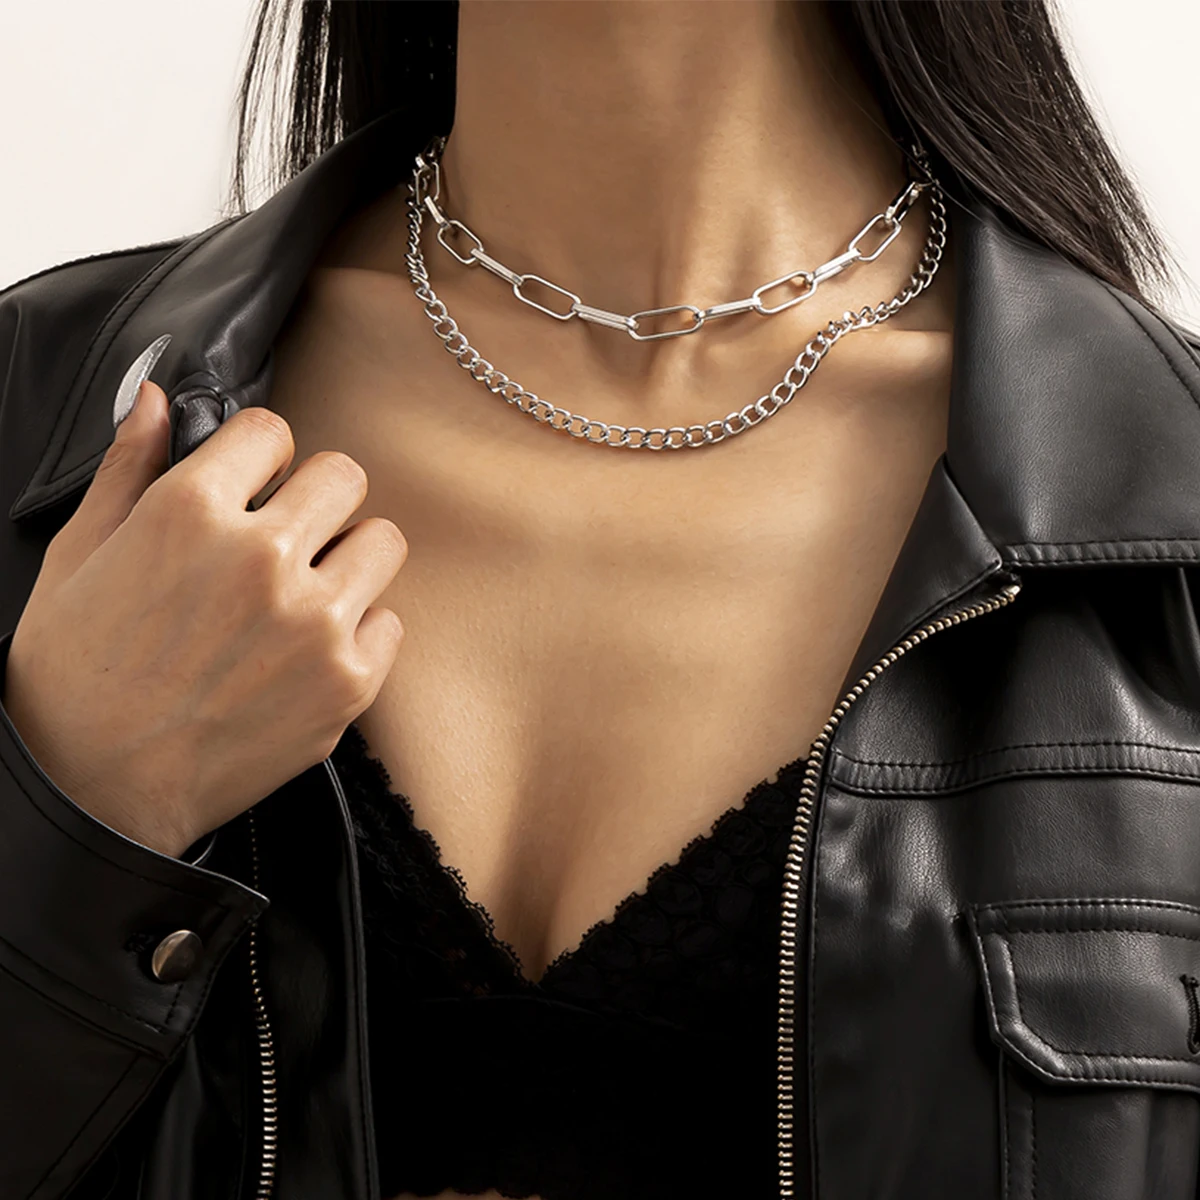 

SHIXIN Gold Color Silver Color Punk Double Chain Arrow Choker Necklace Lariat Necklaces for Women Manon the Neck Hip hop Jewelry